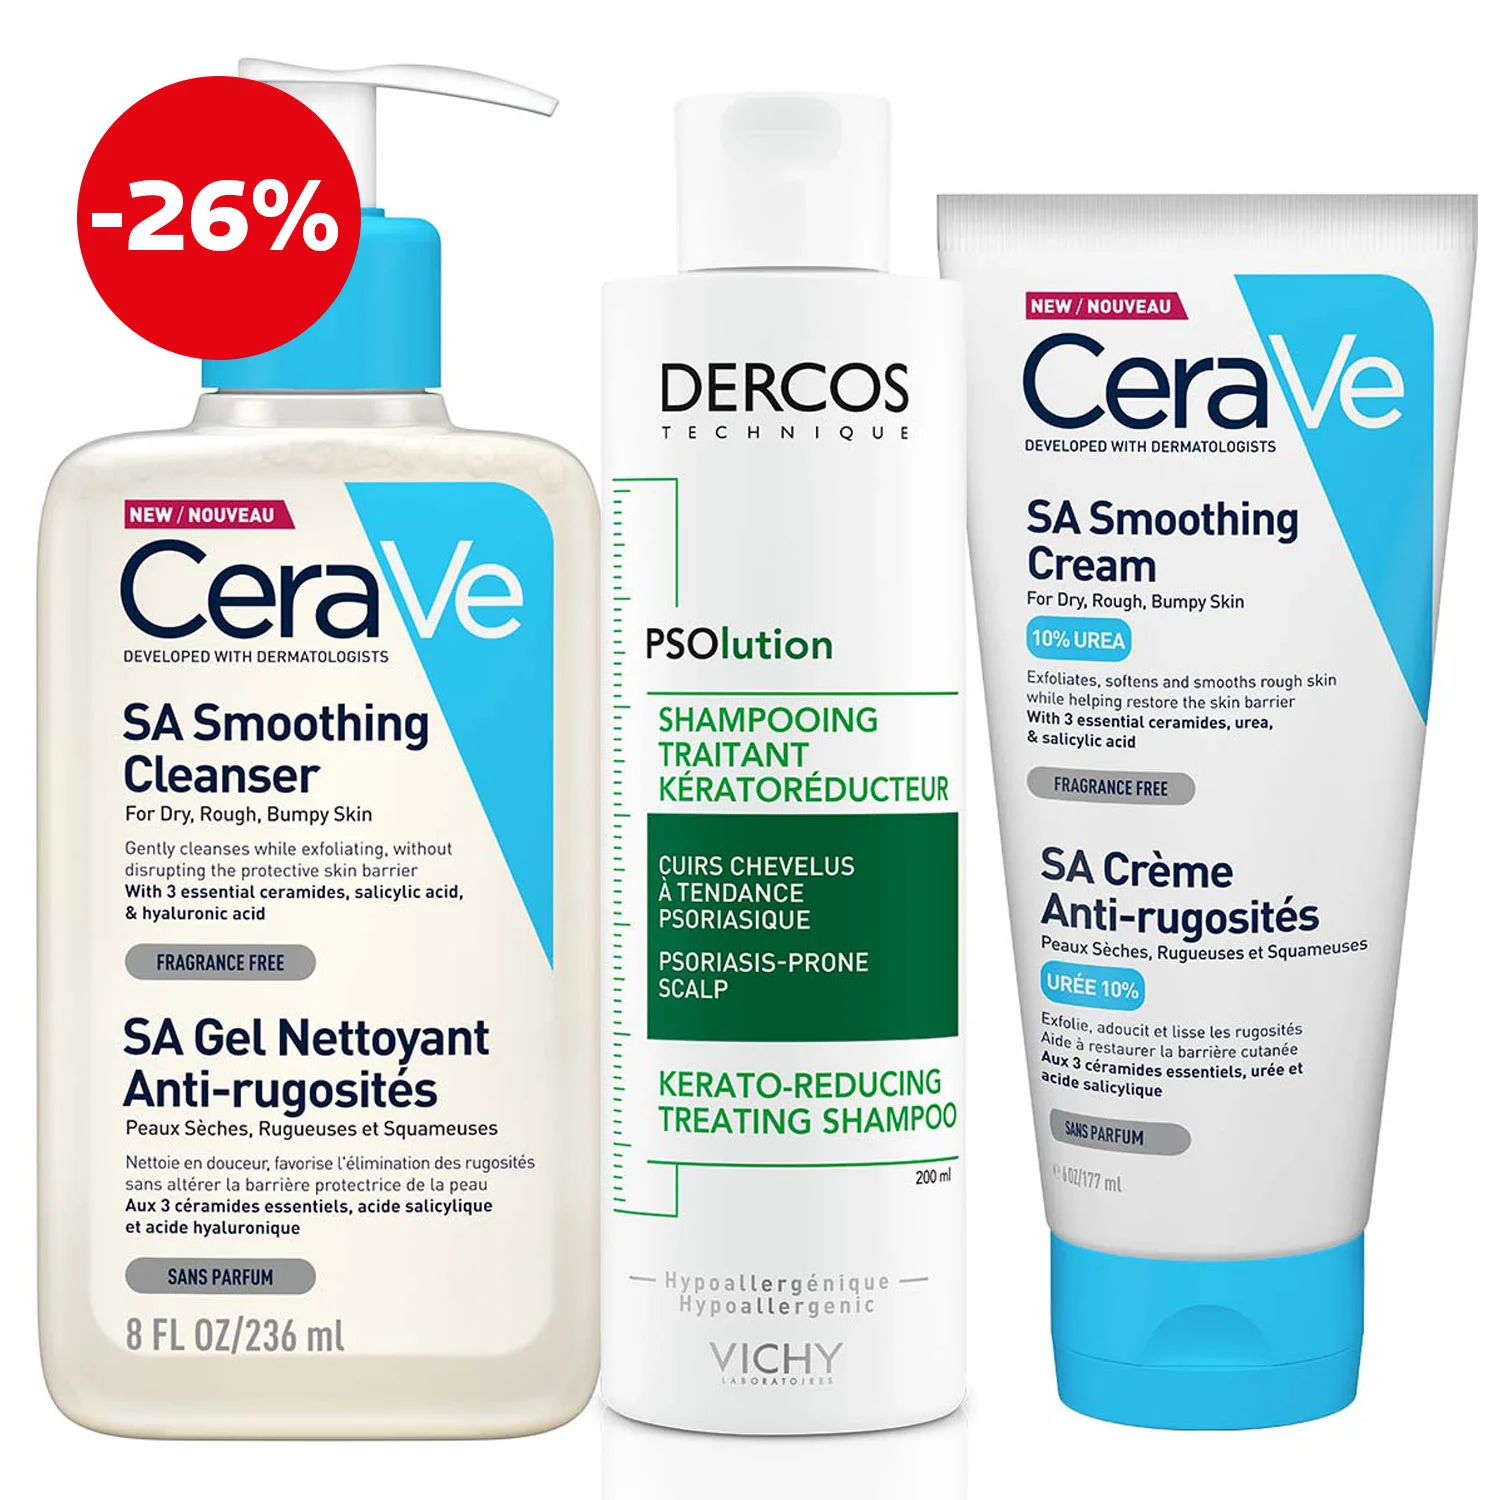 Vichy + CeraVe Soothing protocol for dry, rough skin prone to psoriasis (shampoo, shower gel, body care) (1)